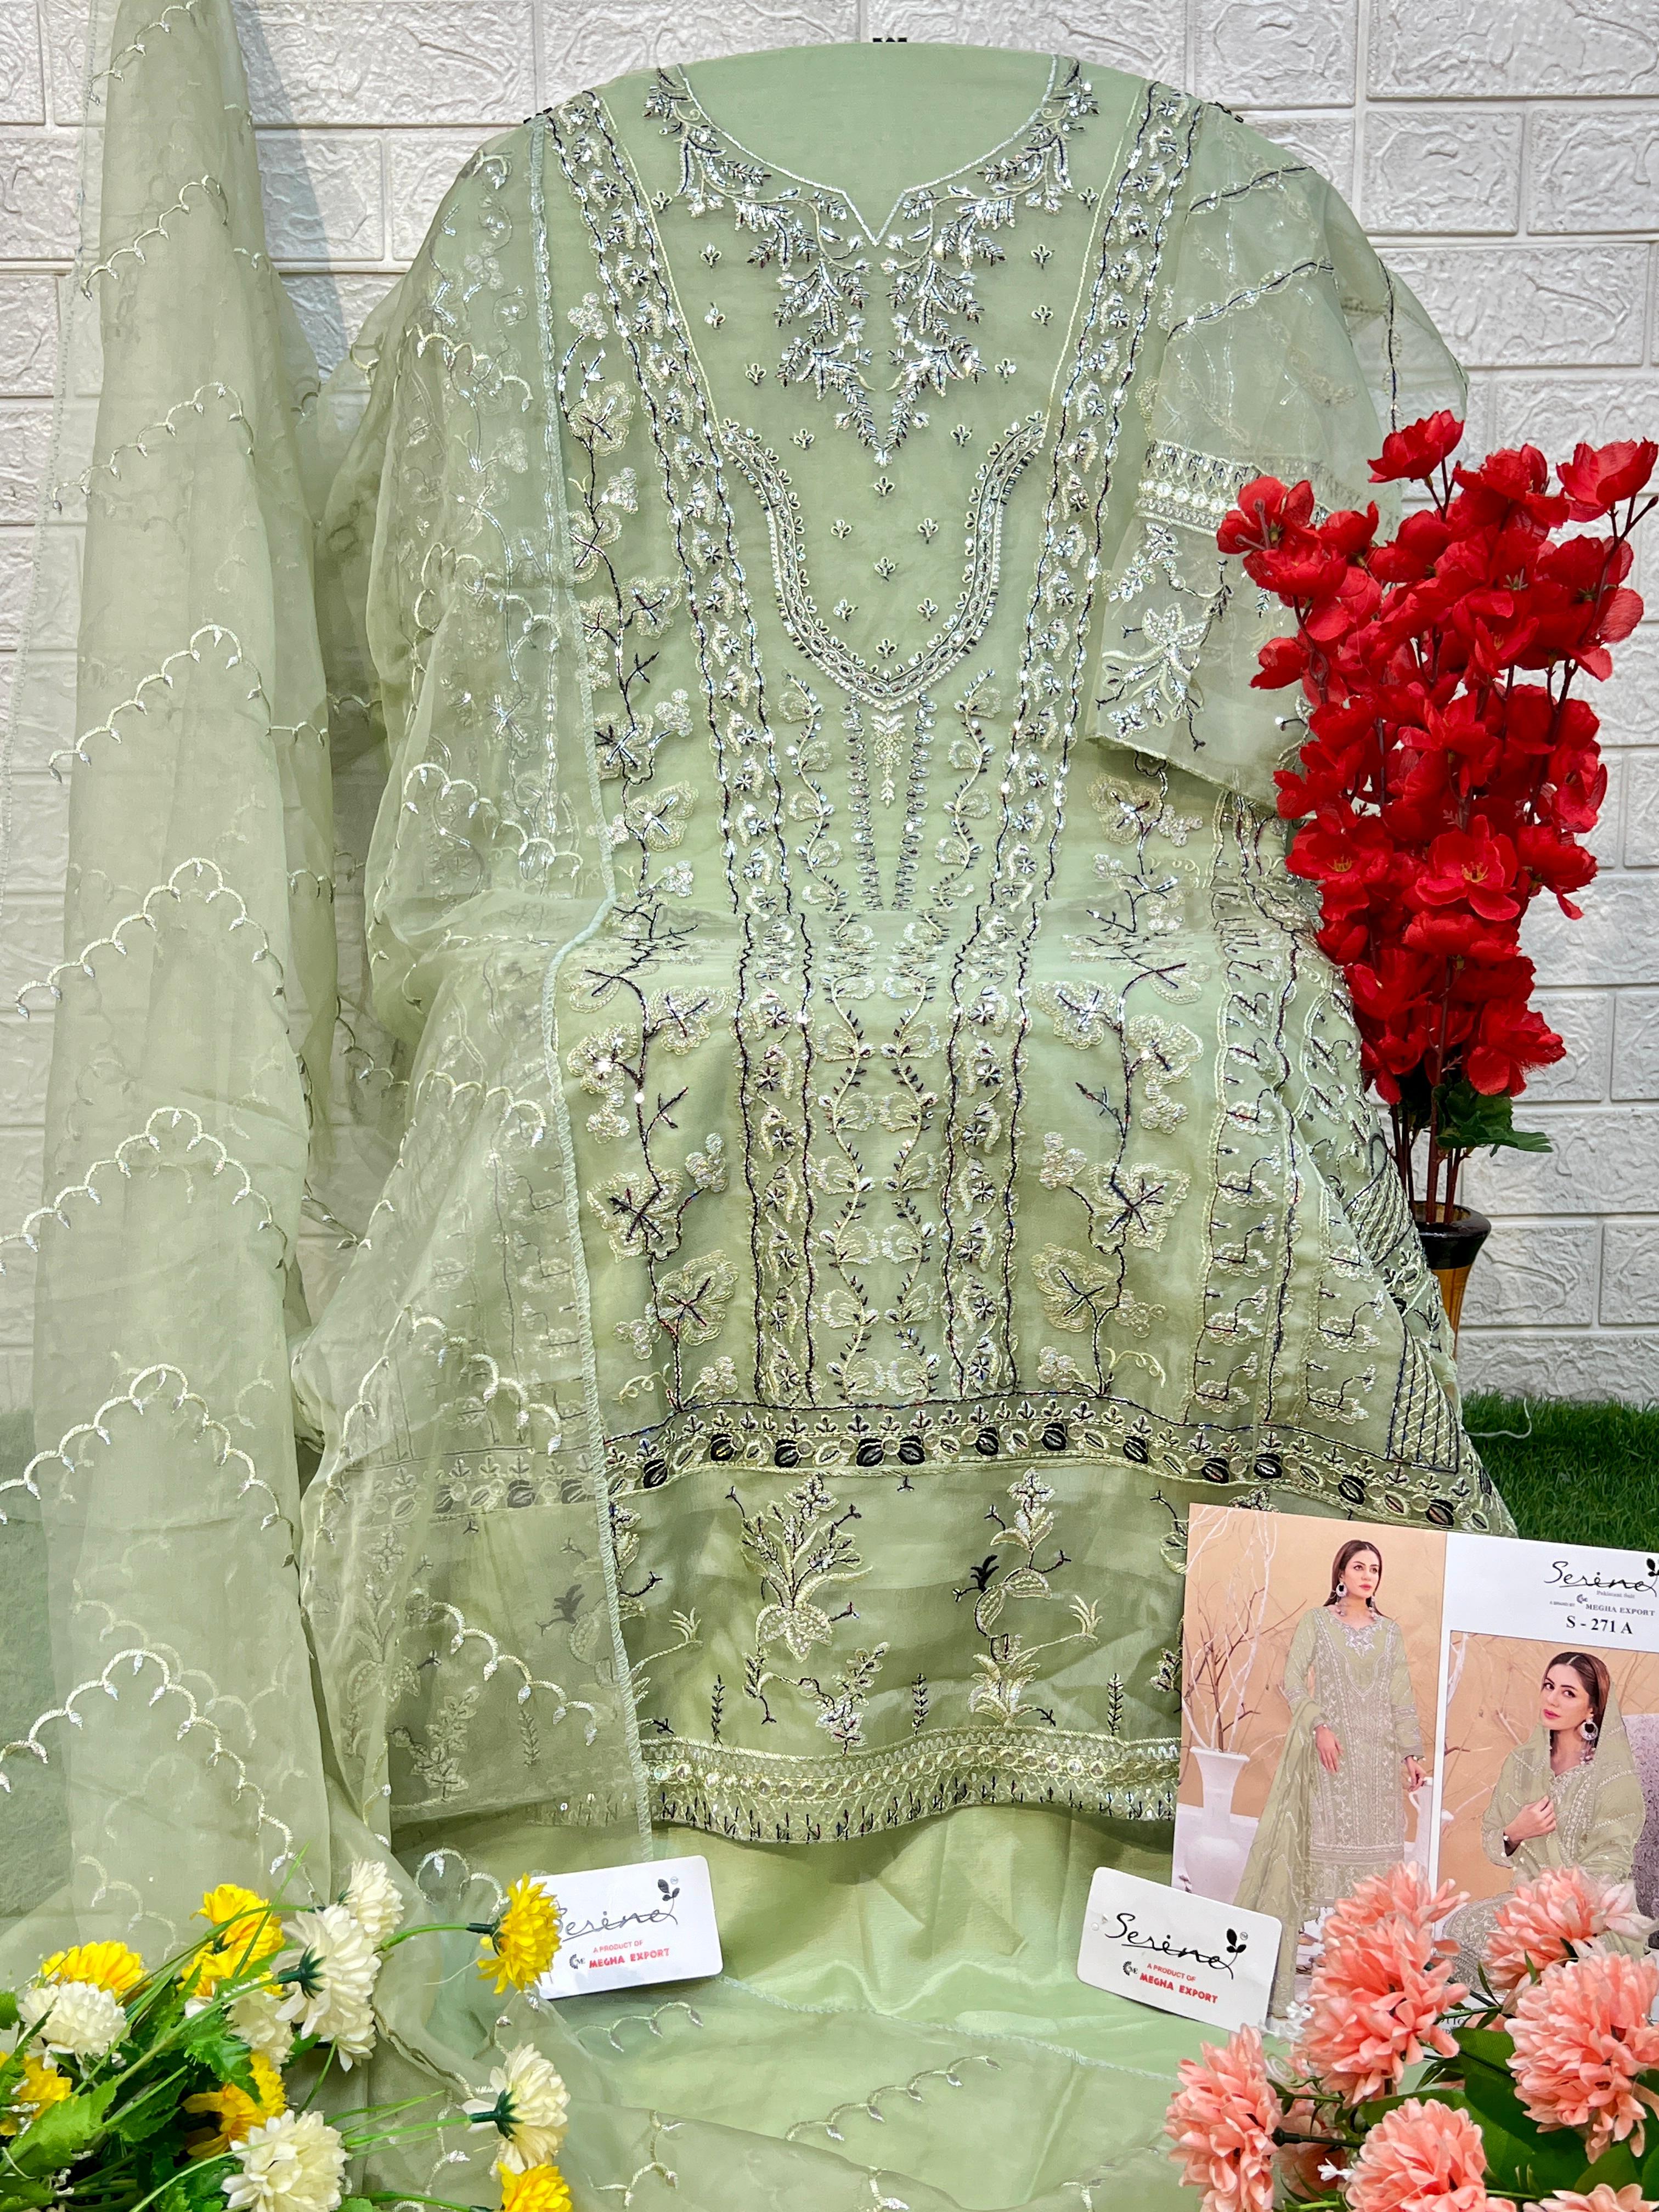 SERINE S 271 A B C D PAKISTANI SUITS IN INDIA